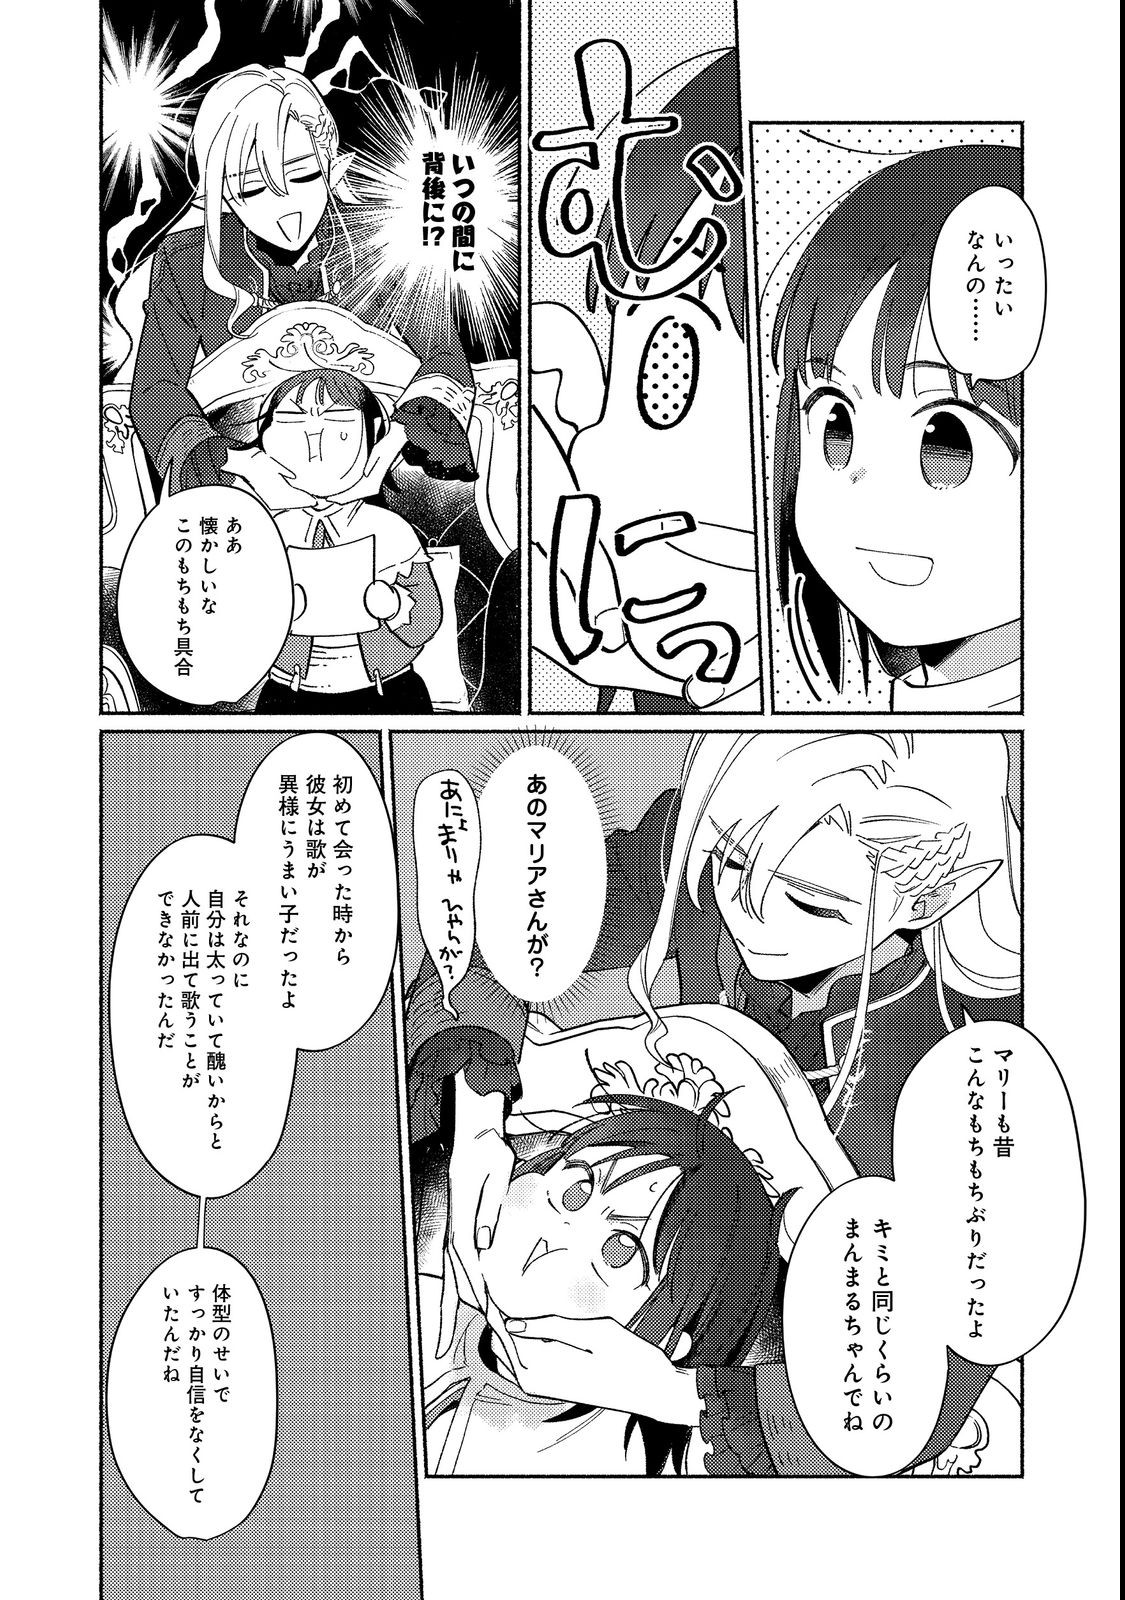 I’m the White Pig Nobleman 第17.1話 - Page 12